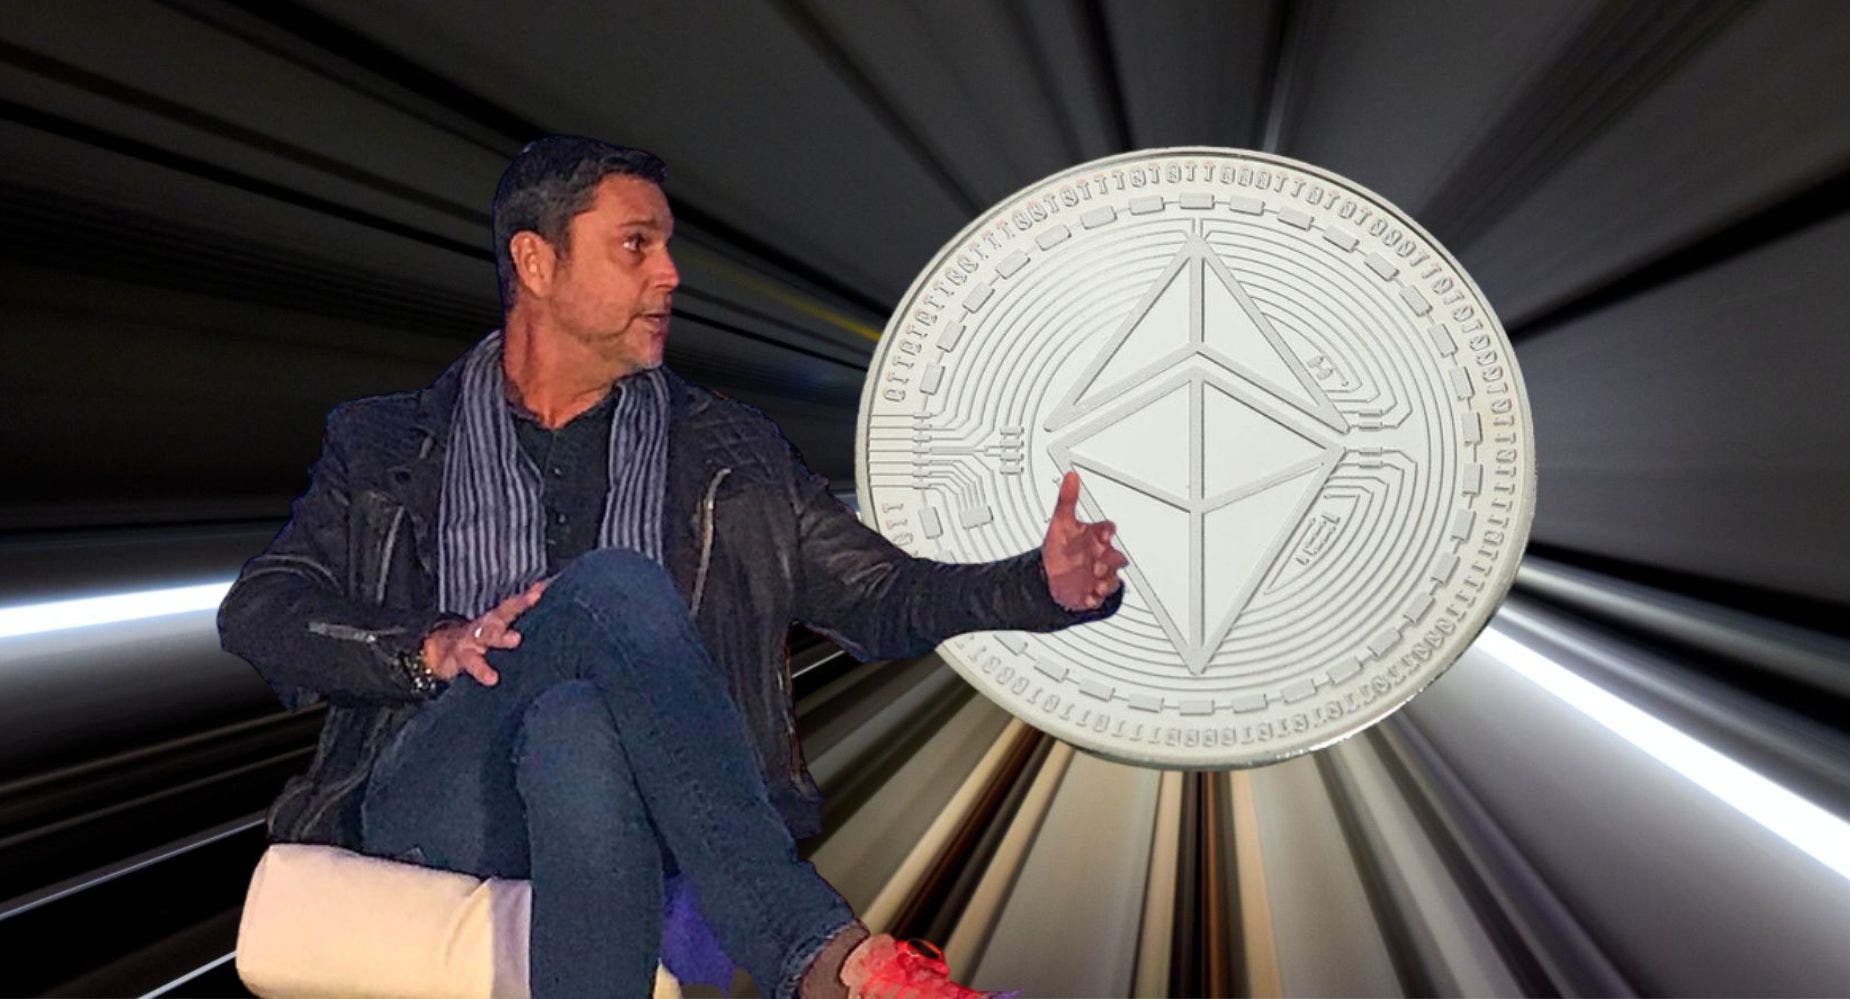 Raoul Pal Calls Ethereum Chart 'Very Constructive': How Much $1,000 Invested Now Would Fetch If Crypto Reclaims Record Highs